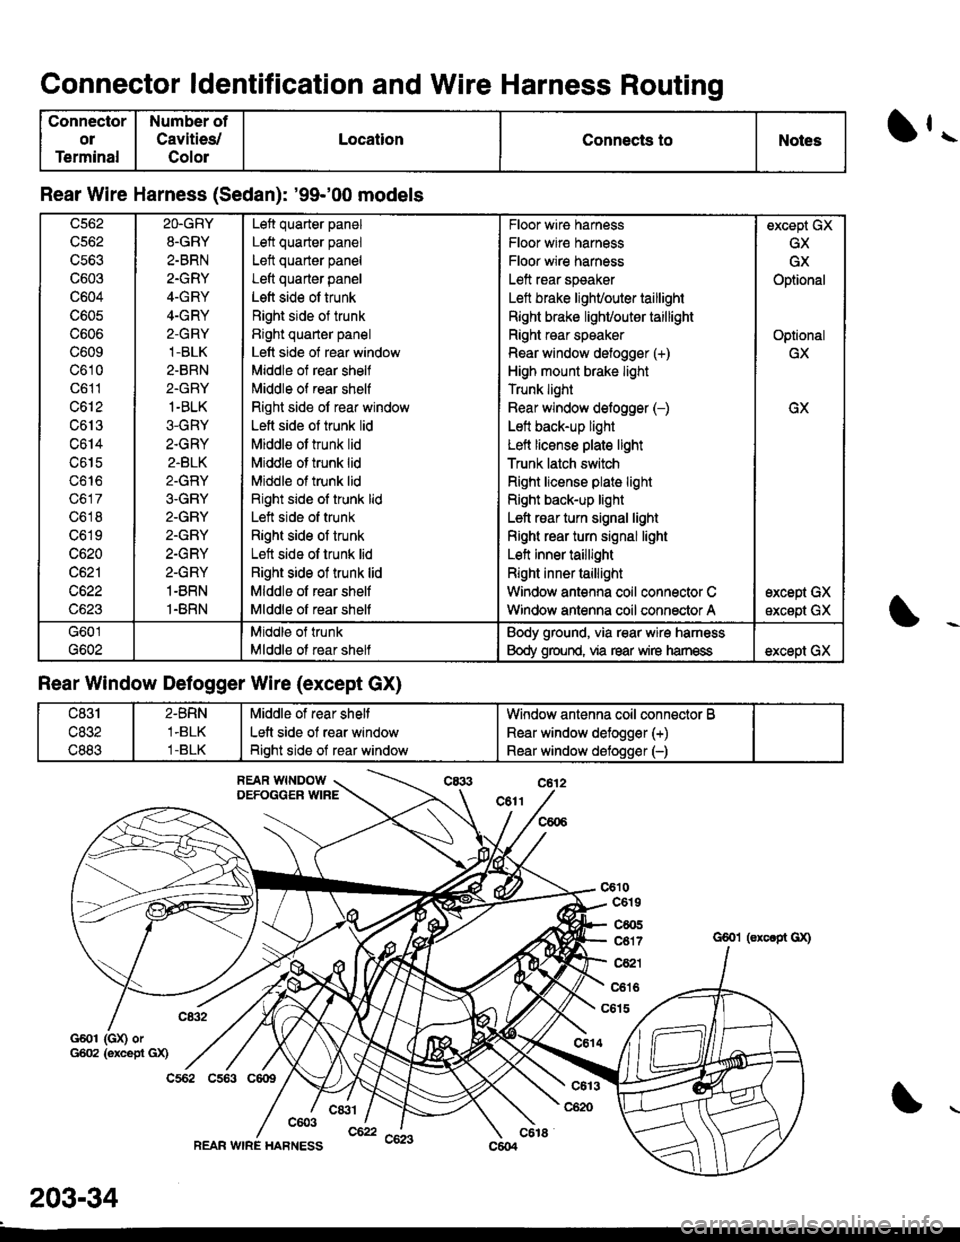 HONDA CIVIC 1998 6.G Manual PDF Connector ldentification and Wire Harness Routinq
Connector
ol
Terminal
Number of
Cavities/
Color
LocationConnects toNotesll..
Rear Wire Harness (Sedan): 99-00 models
G601 (GX) orG602 (excepi GX)
c6